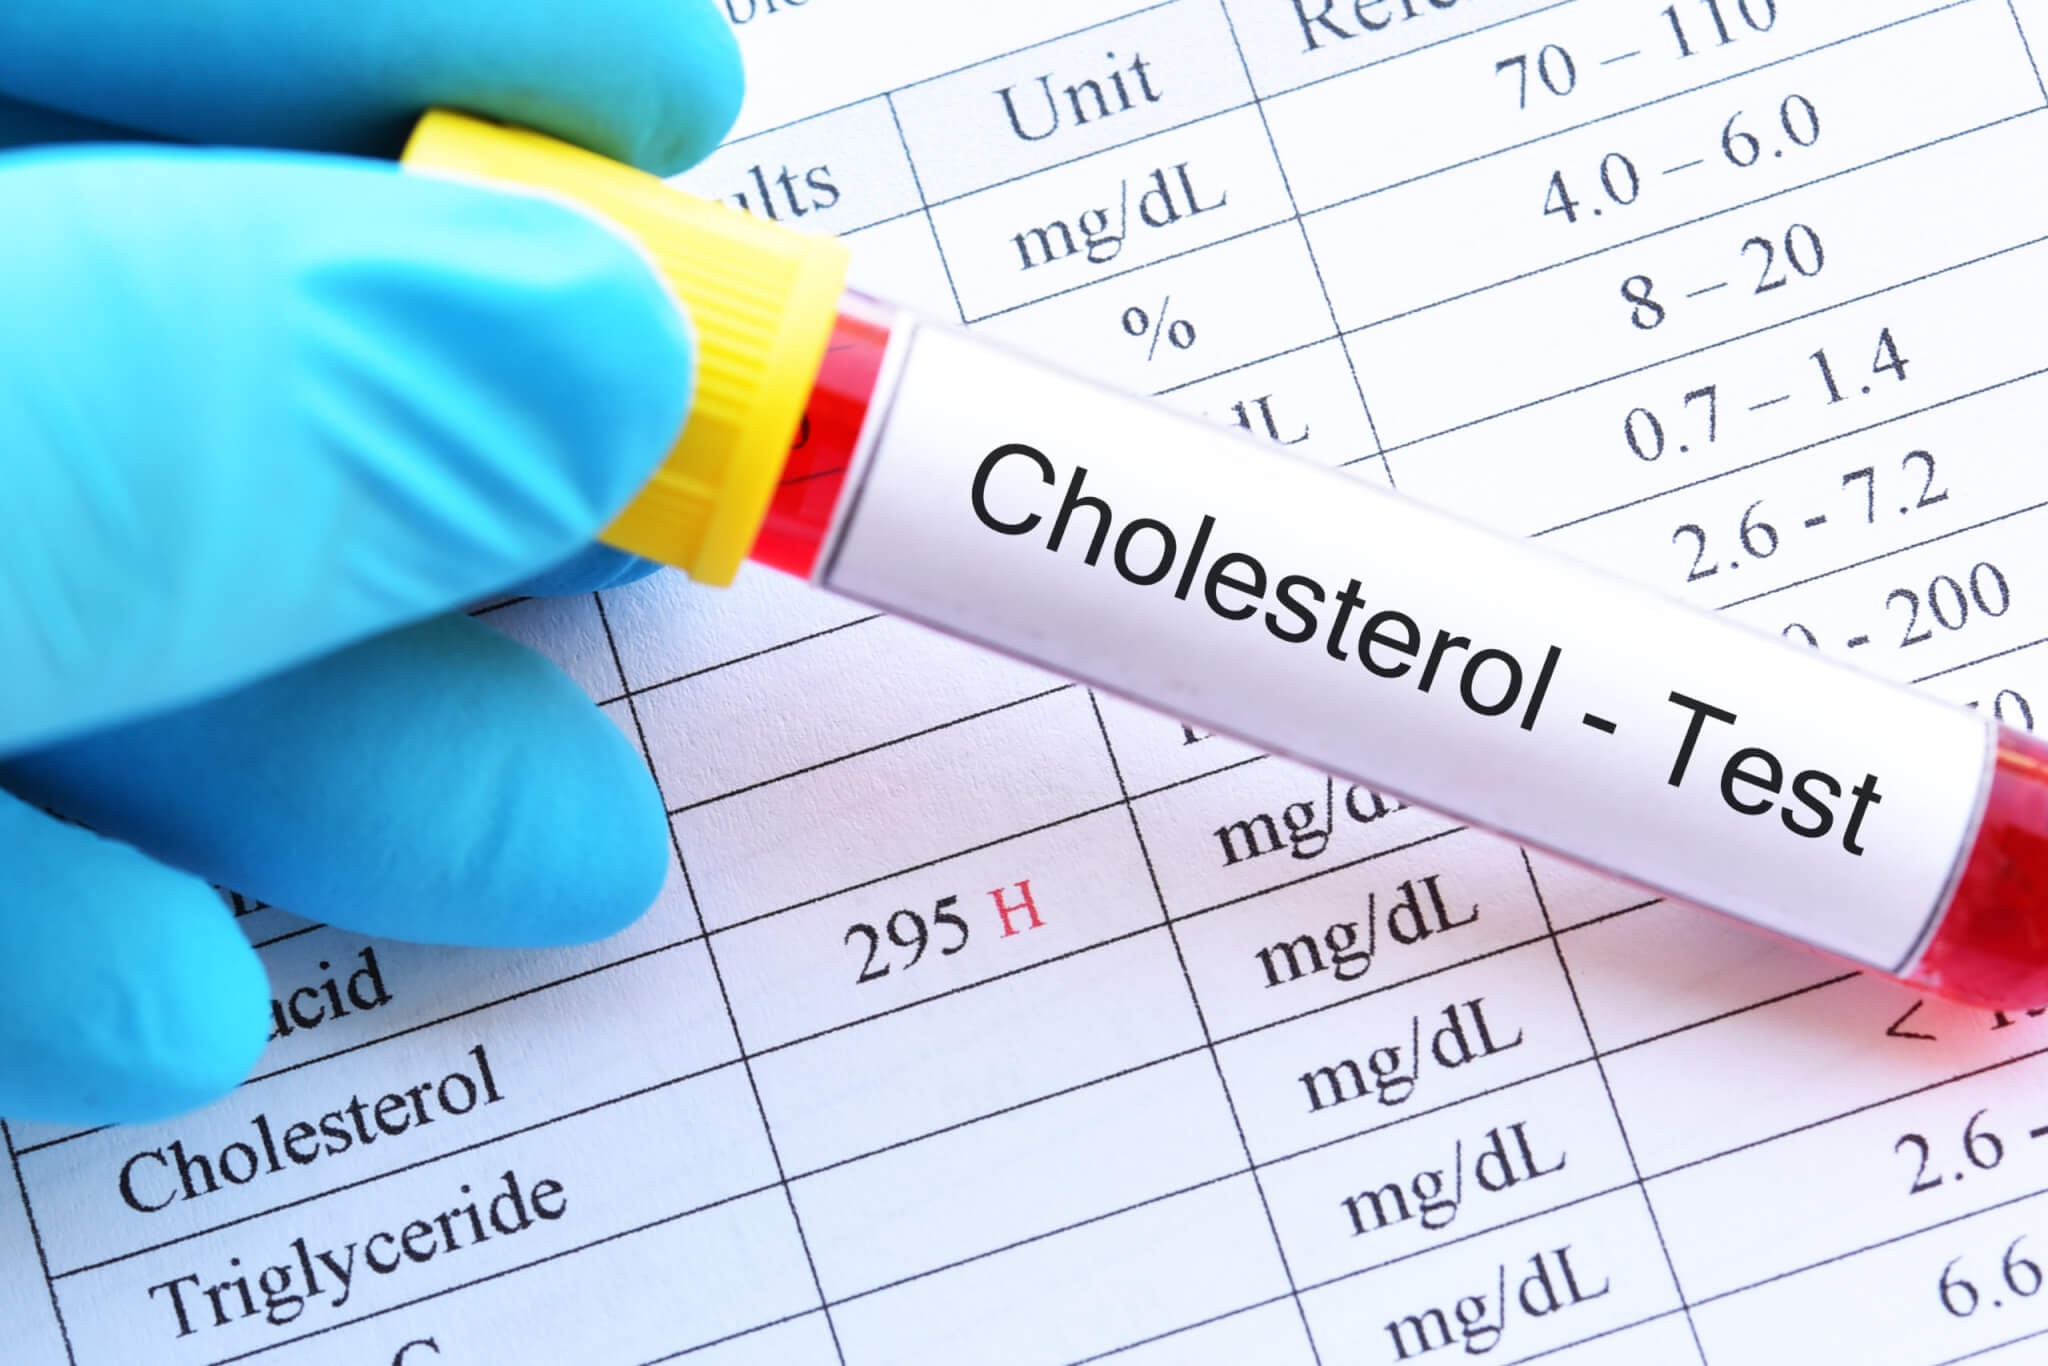 Cholesterol test -- results show high cholesterol